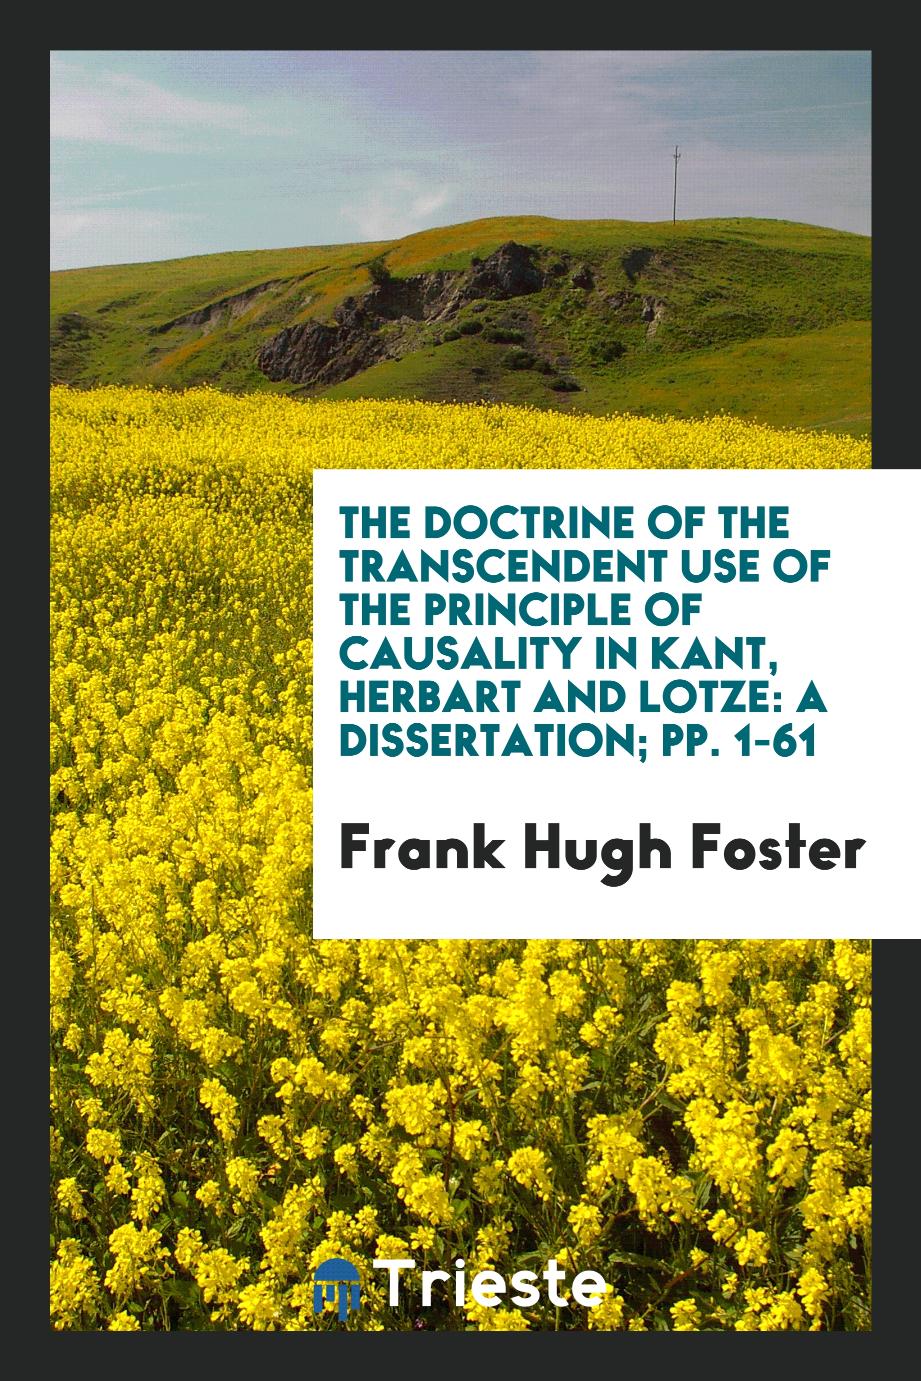 The Doctrine of the Transcendent Use of the Principle of Causality in Kant, Herbart and Lotze: a dissertation; pp. 1-61